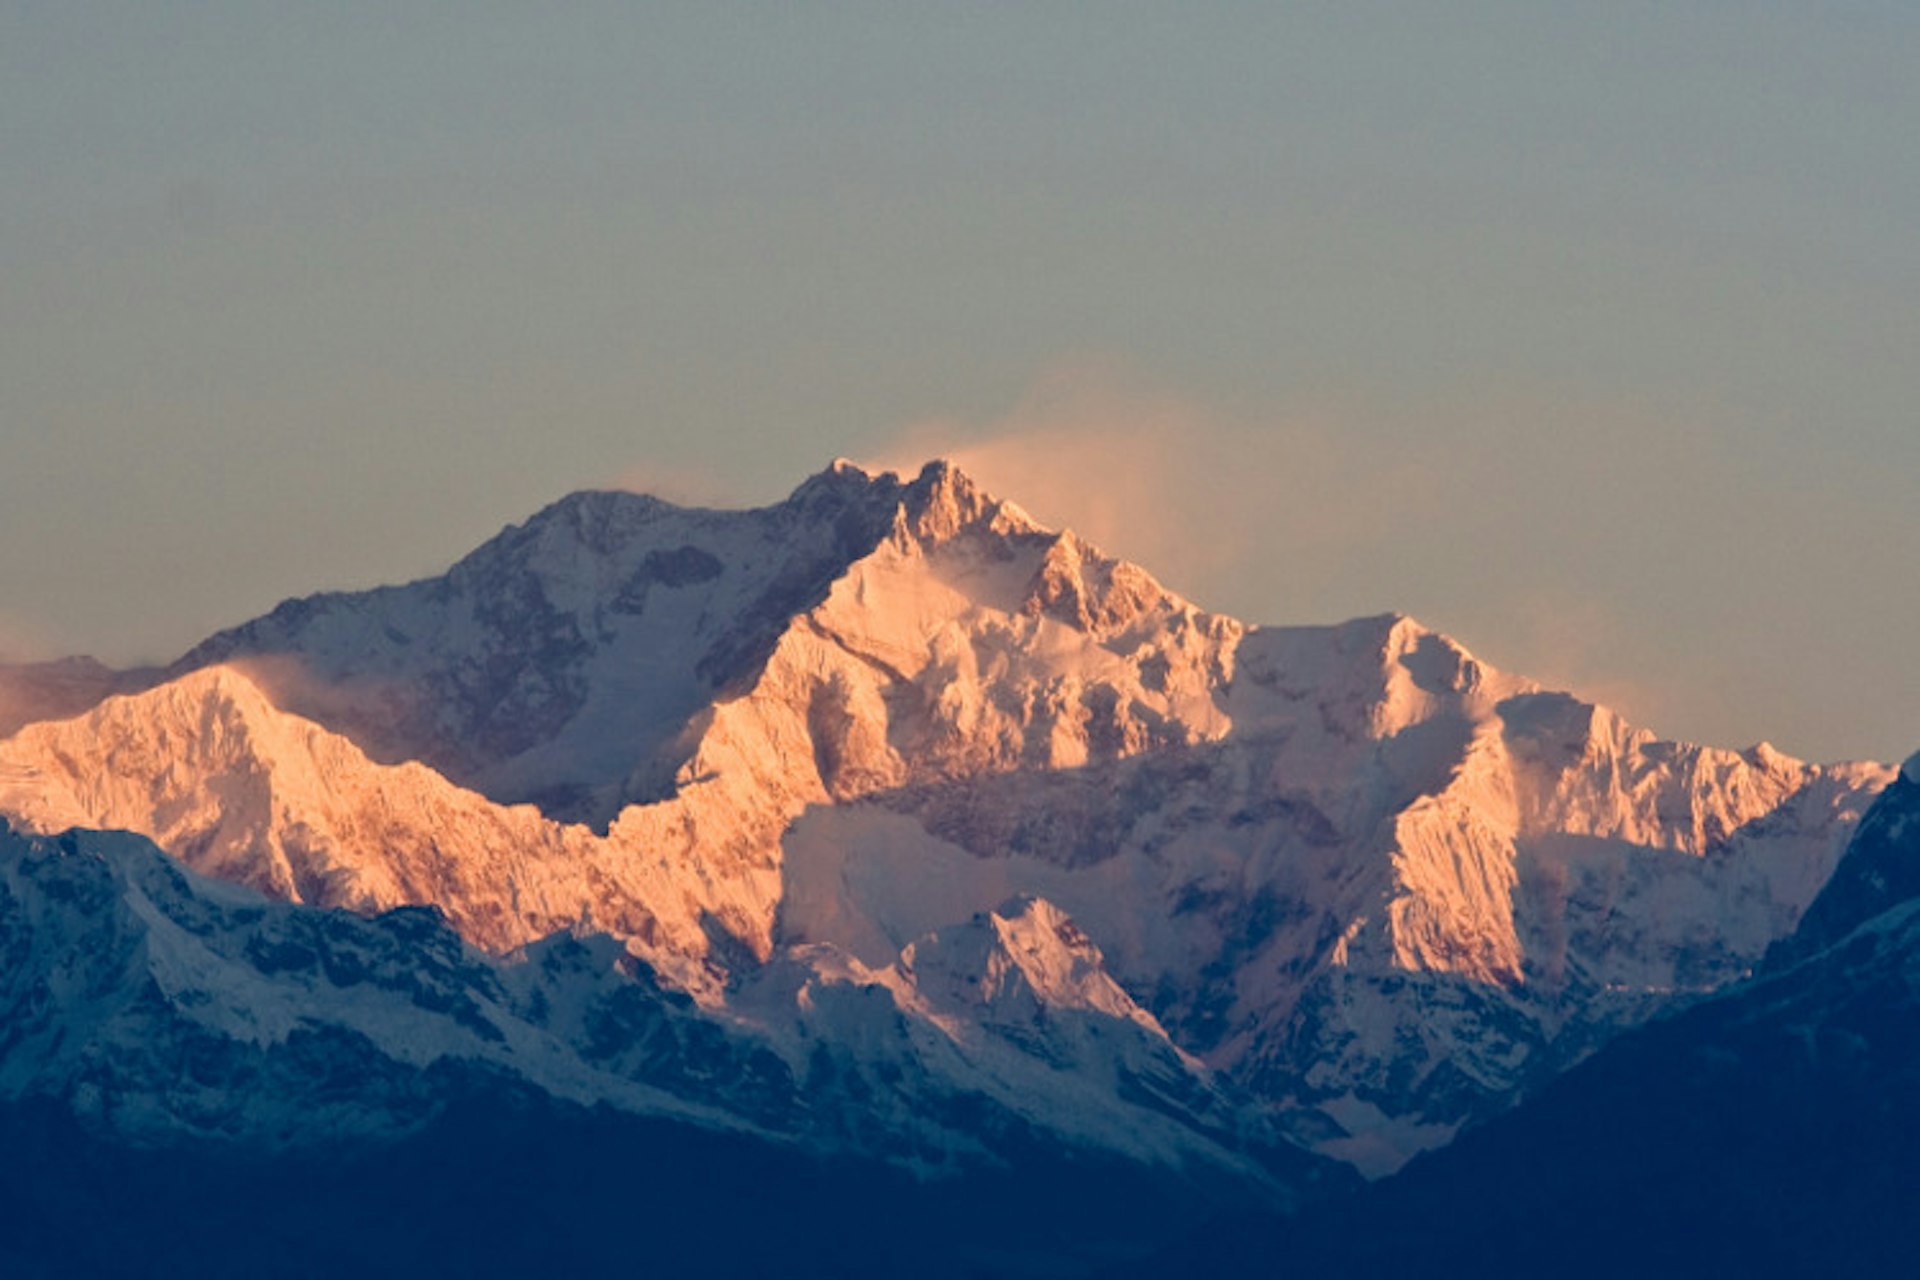 Kangchenjunga at dawn. Image by A.Ostrovsky / CC BY-SA 2.0.